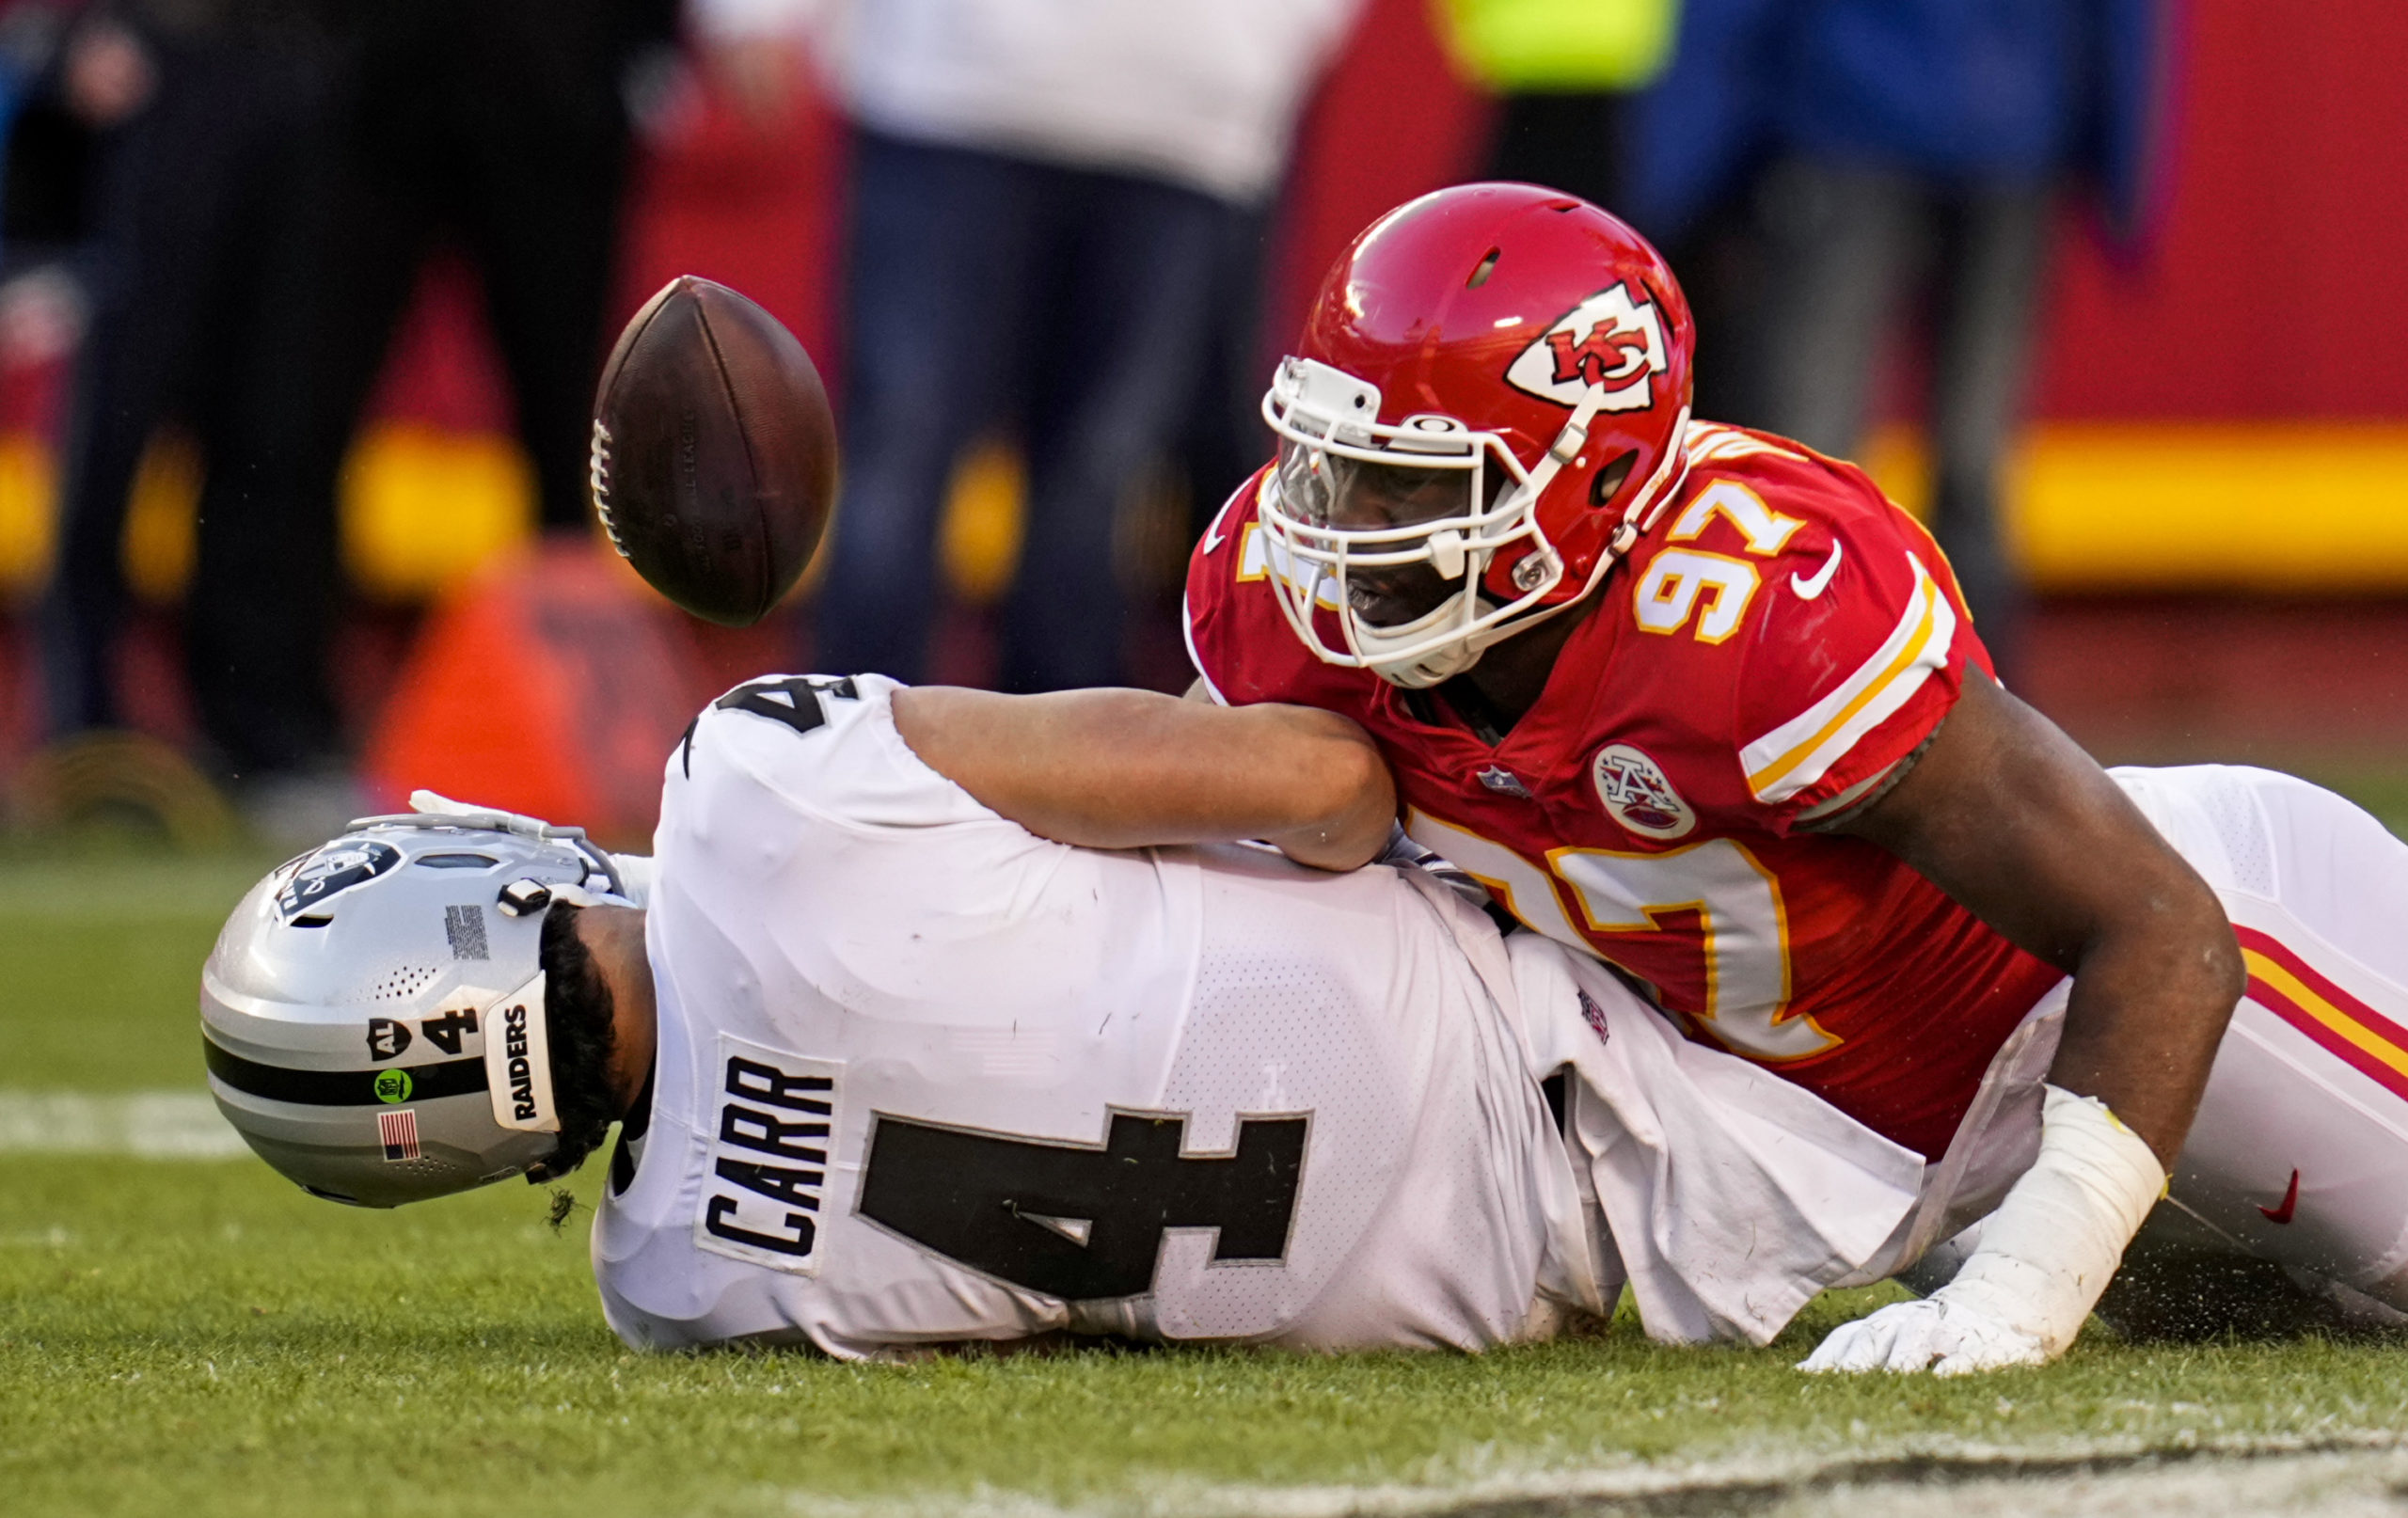 Raiders-Chiefs Week 5 Scouting Report: Grades and Key Matchups